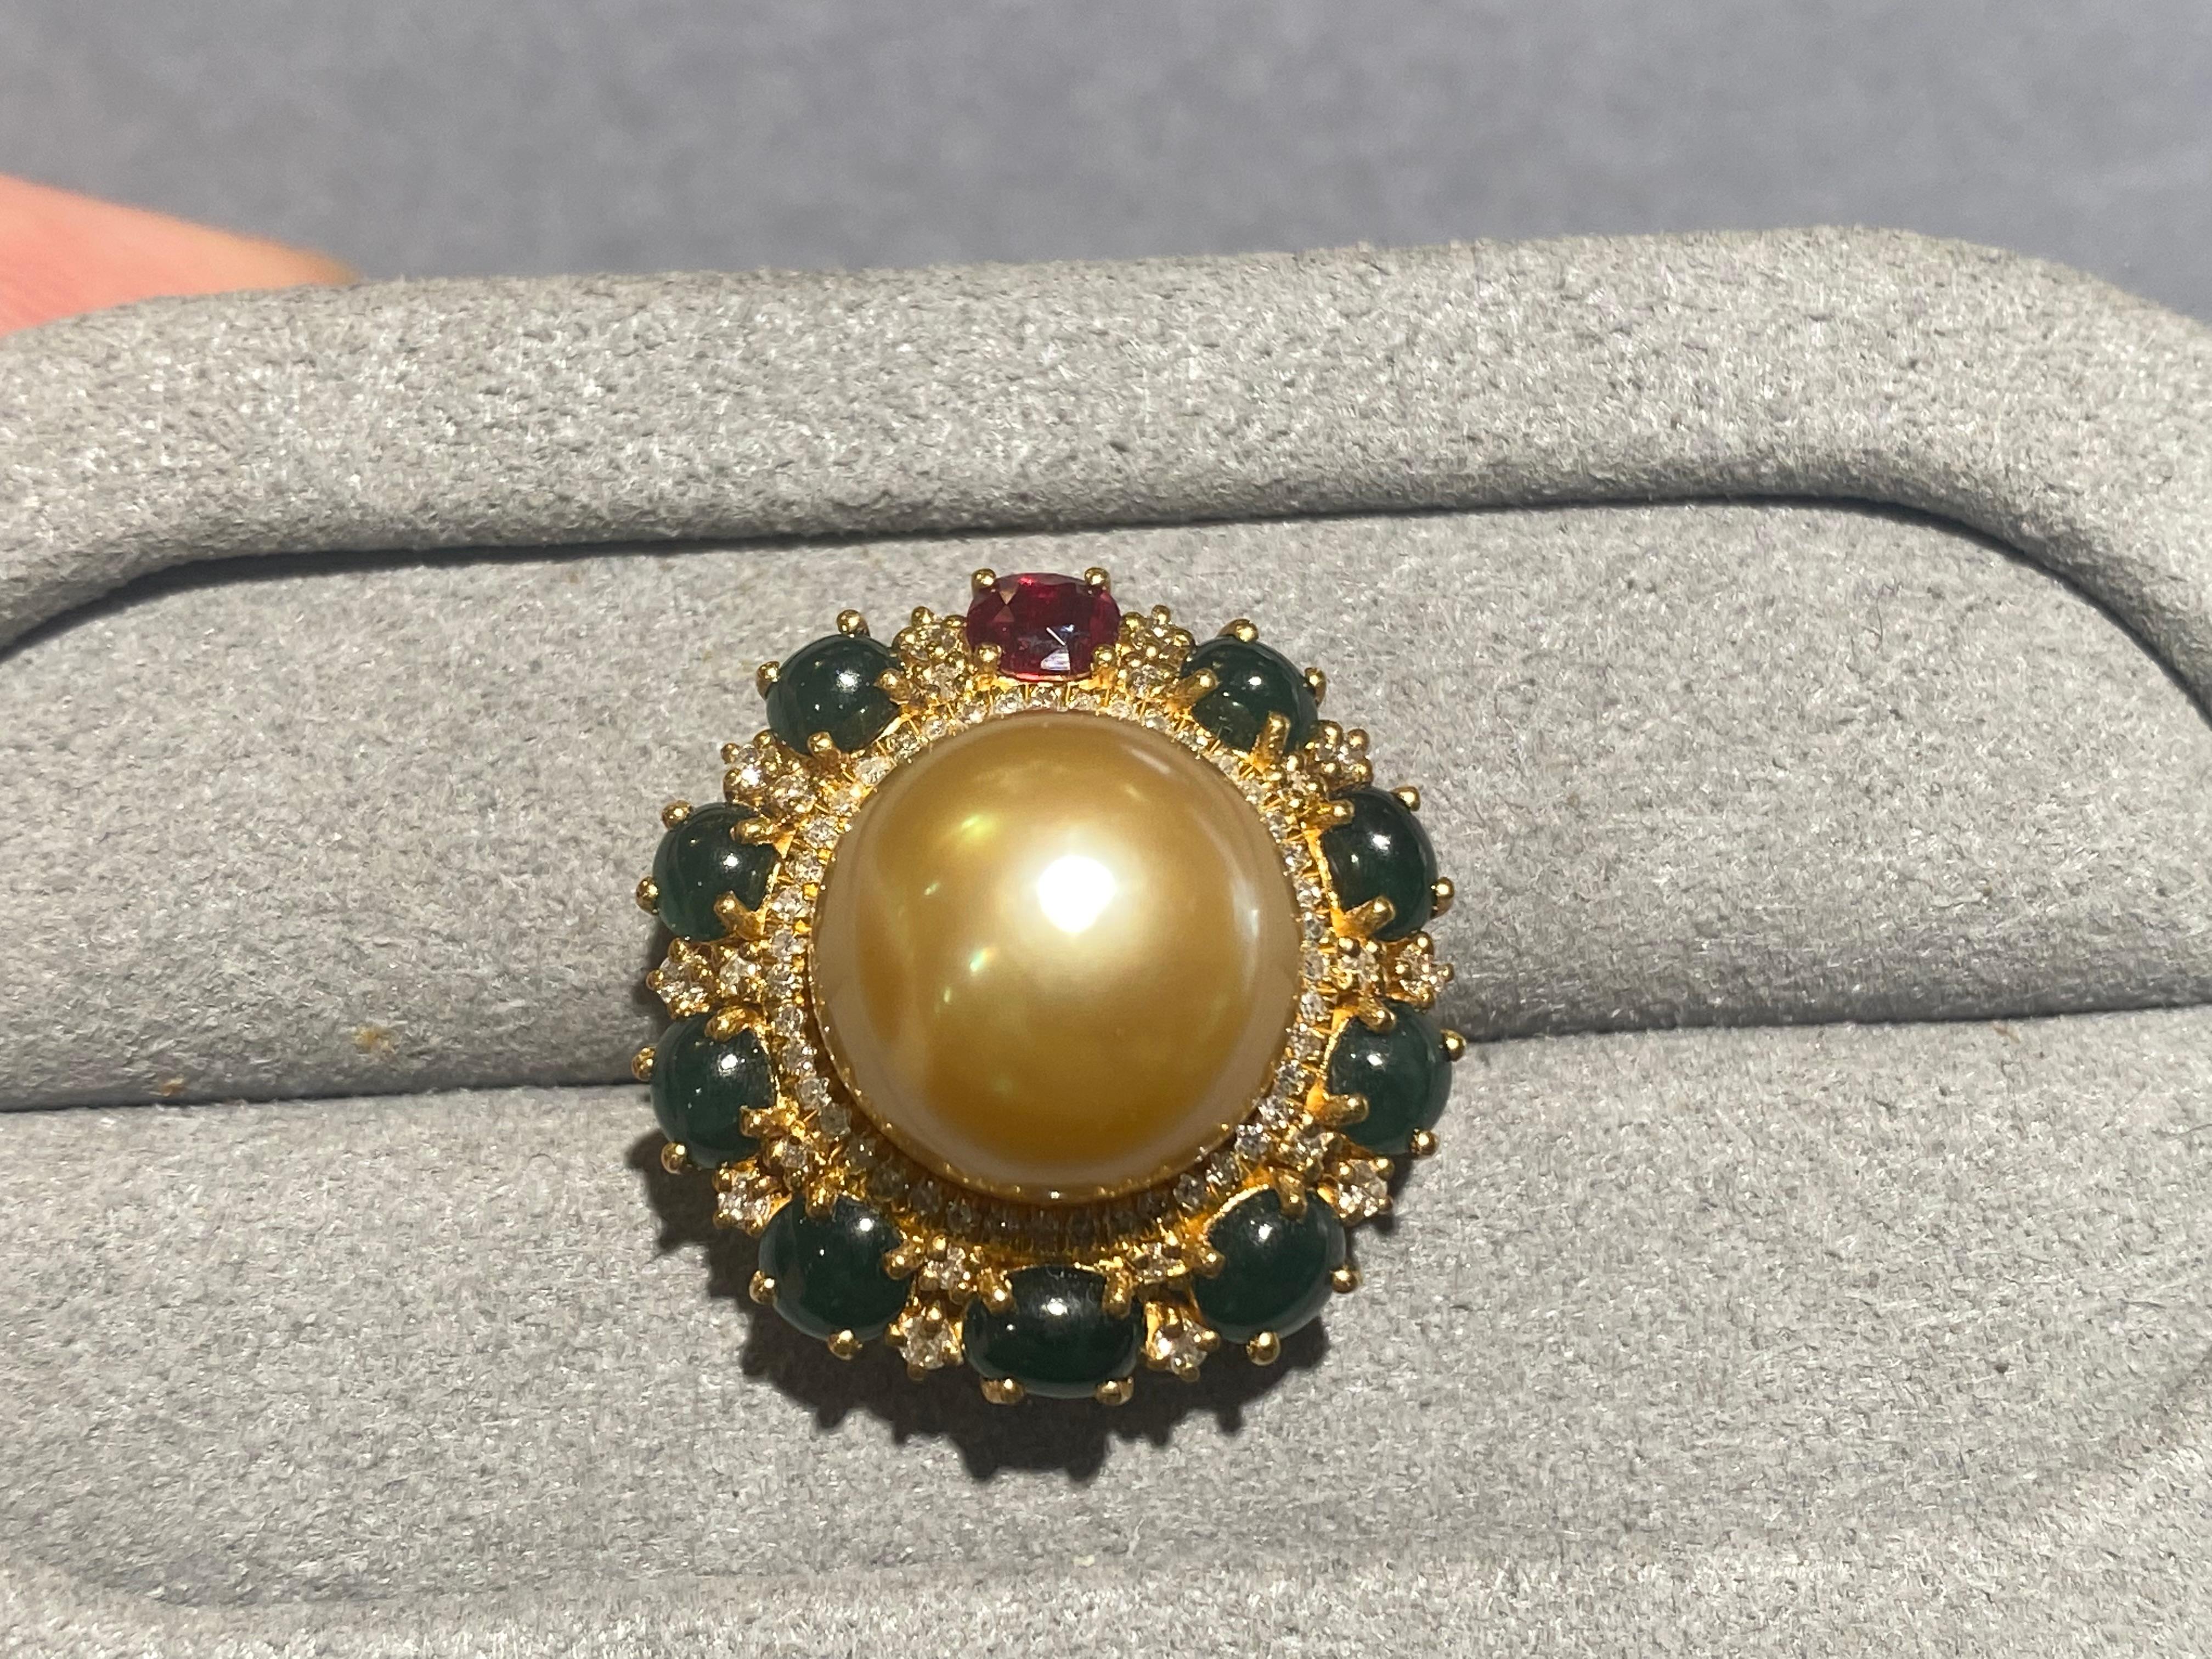 A 11.6 mm deep golden south sea pearl is set in the middle of a floral motif pendant in 18k yellow gold. The outer layer of the pendant is set with a vivid red ruby and 9 type A green jadeite. There are 2 diamonds set between each green Jadeite and